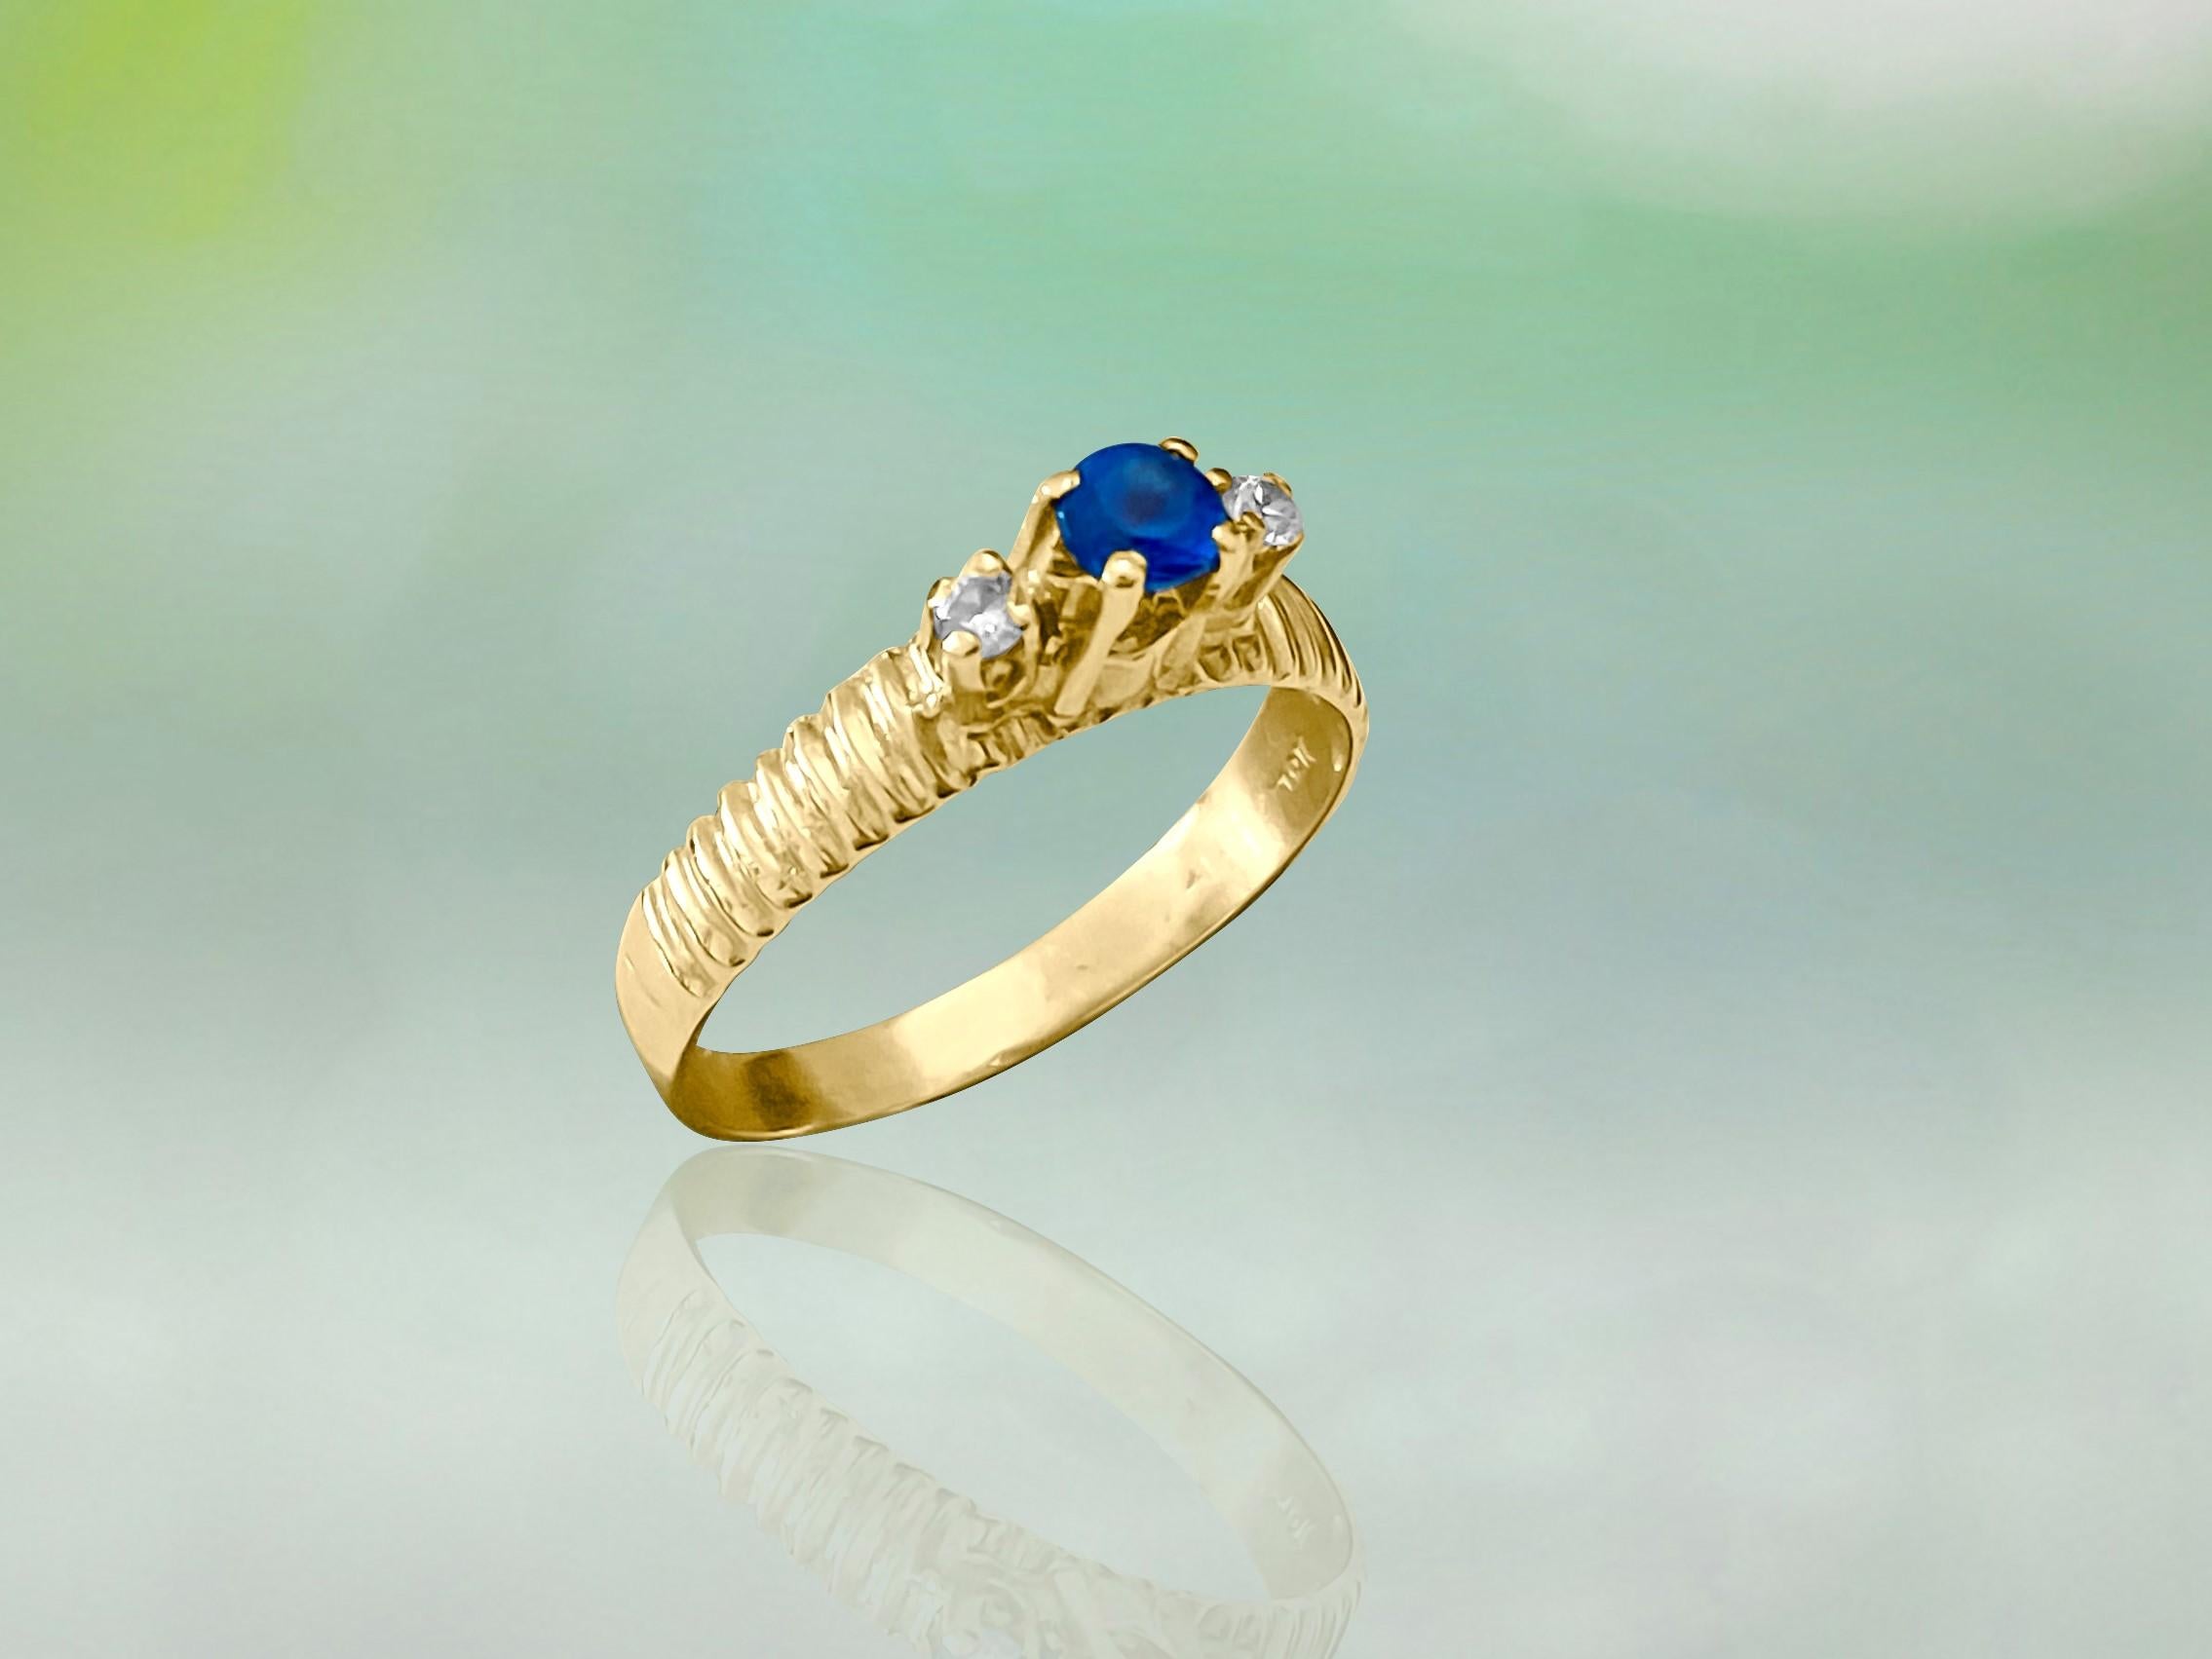 Metal: 14k yellow gold. 
Gemstone: blue sapphire. 
Side stones: diamonds. Round brilliant cut set in prongs. 100% natural earth mined diamonds. SI2 clarity and G-H color. 
Womens estate blue sapphire, diamond and gold ring.
Perfect weddings and